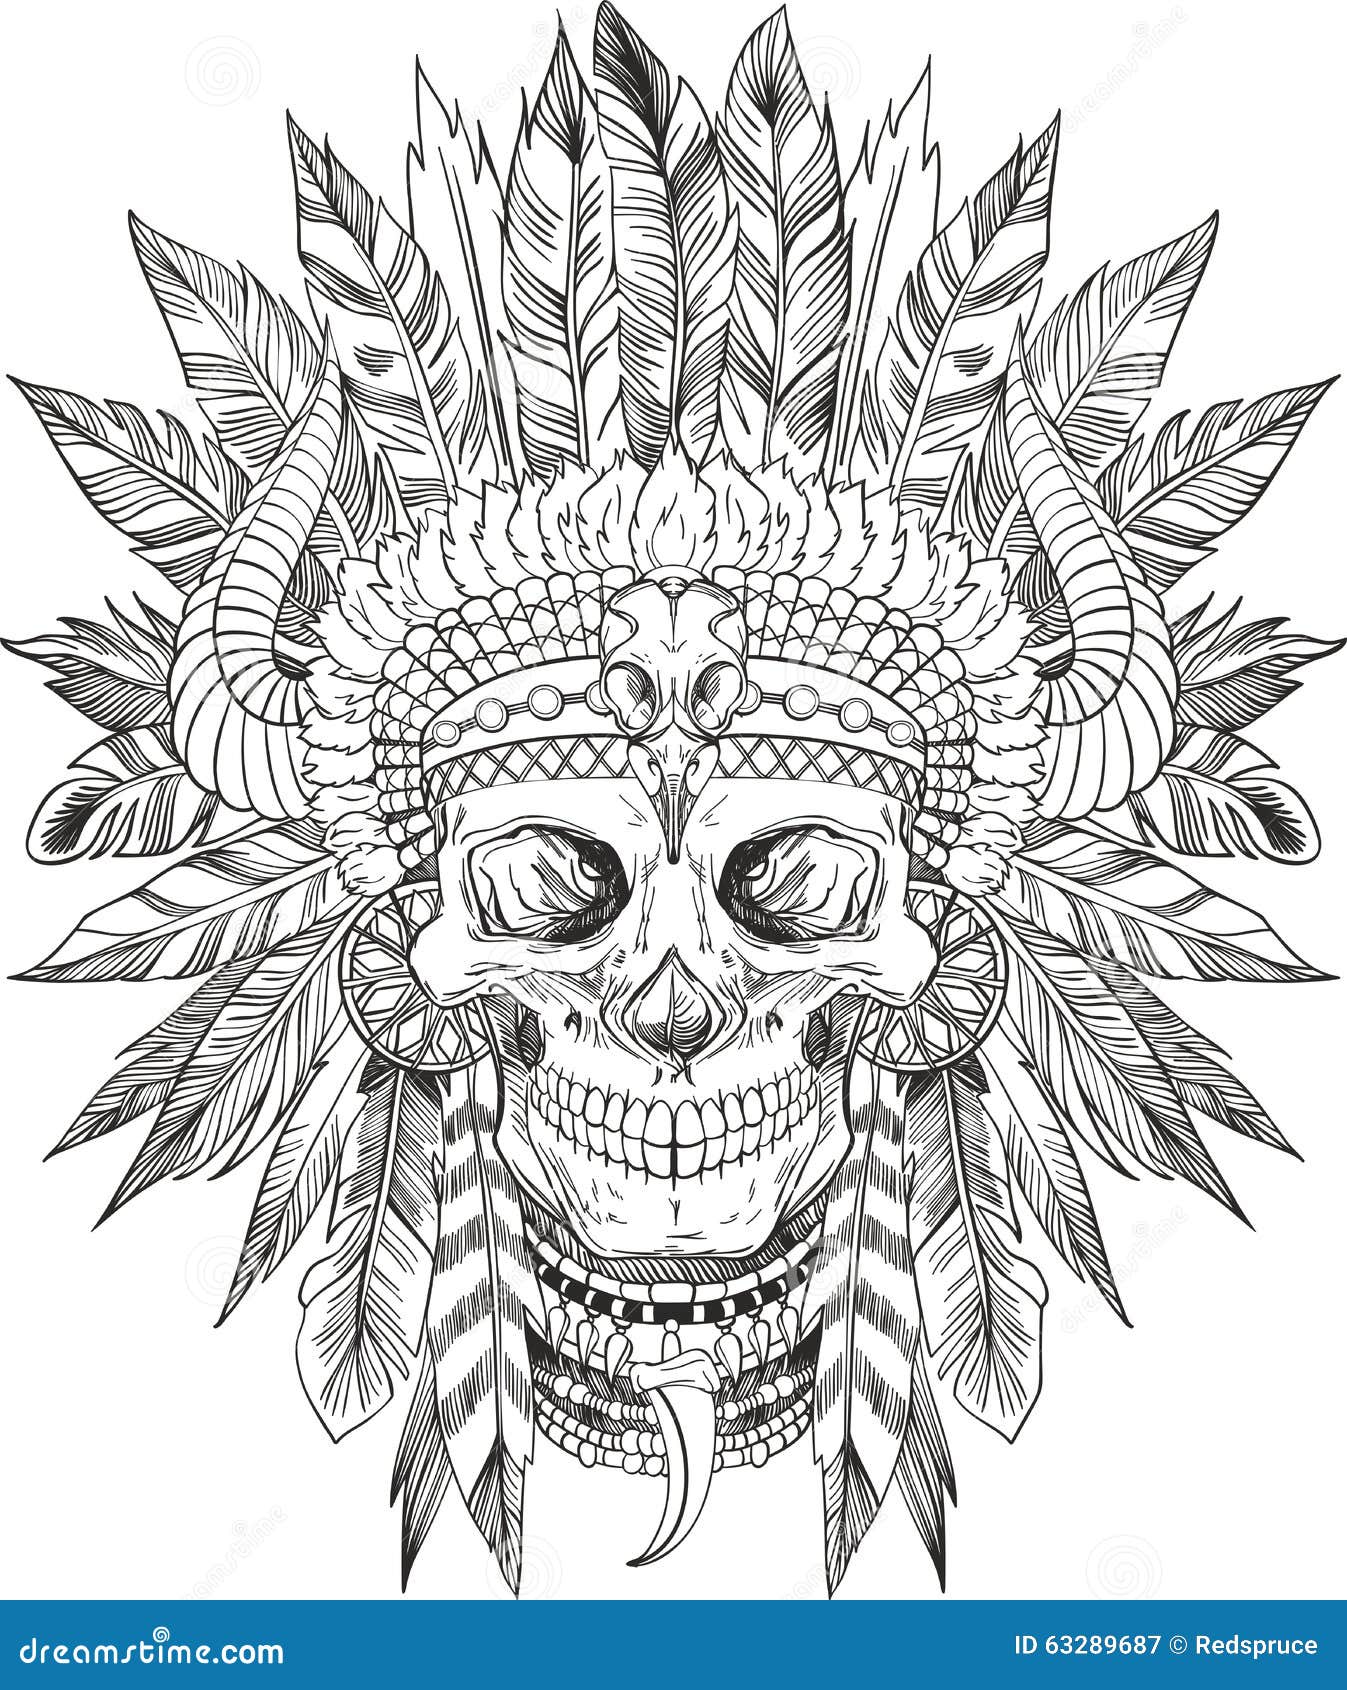 Indian Chief Skull Stock Vector - Image: 63289687